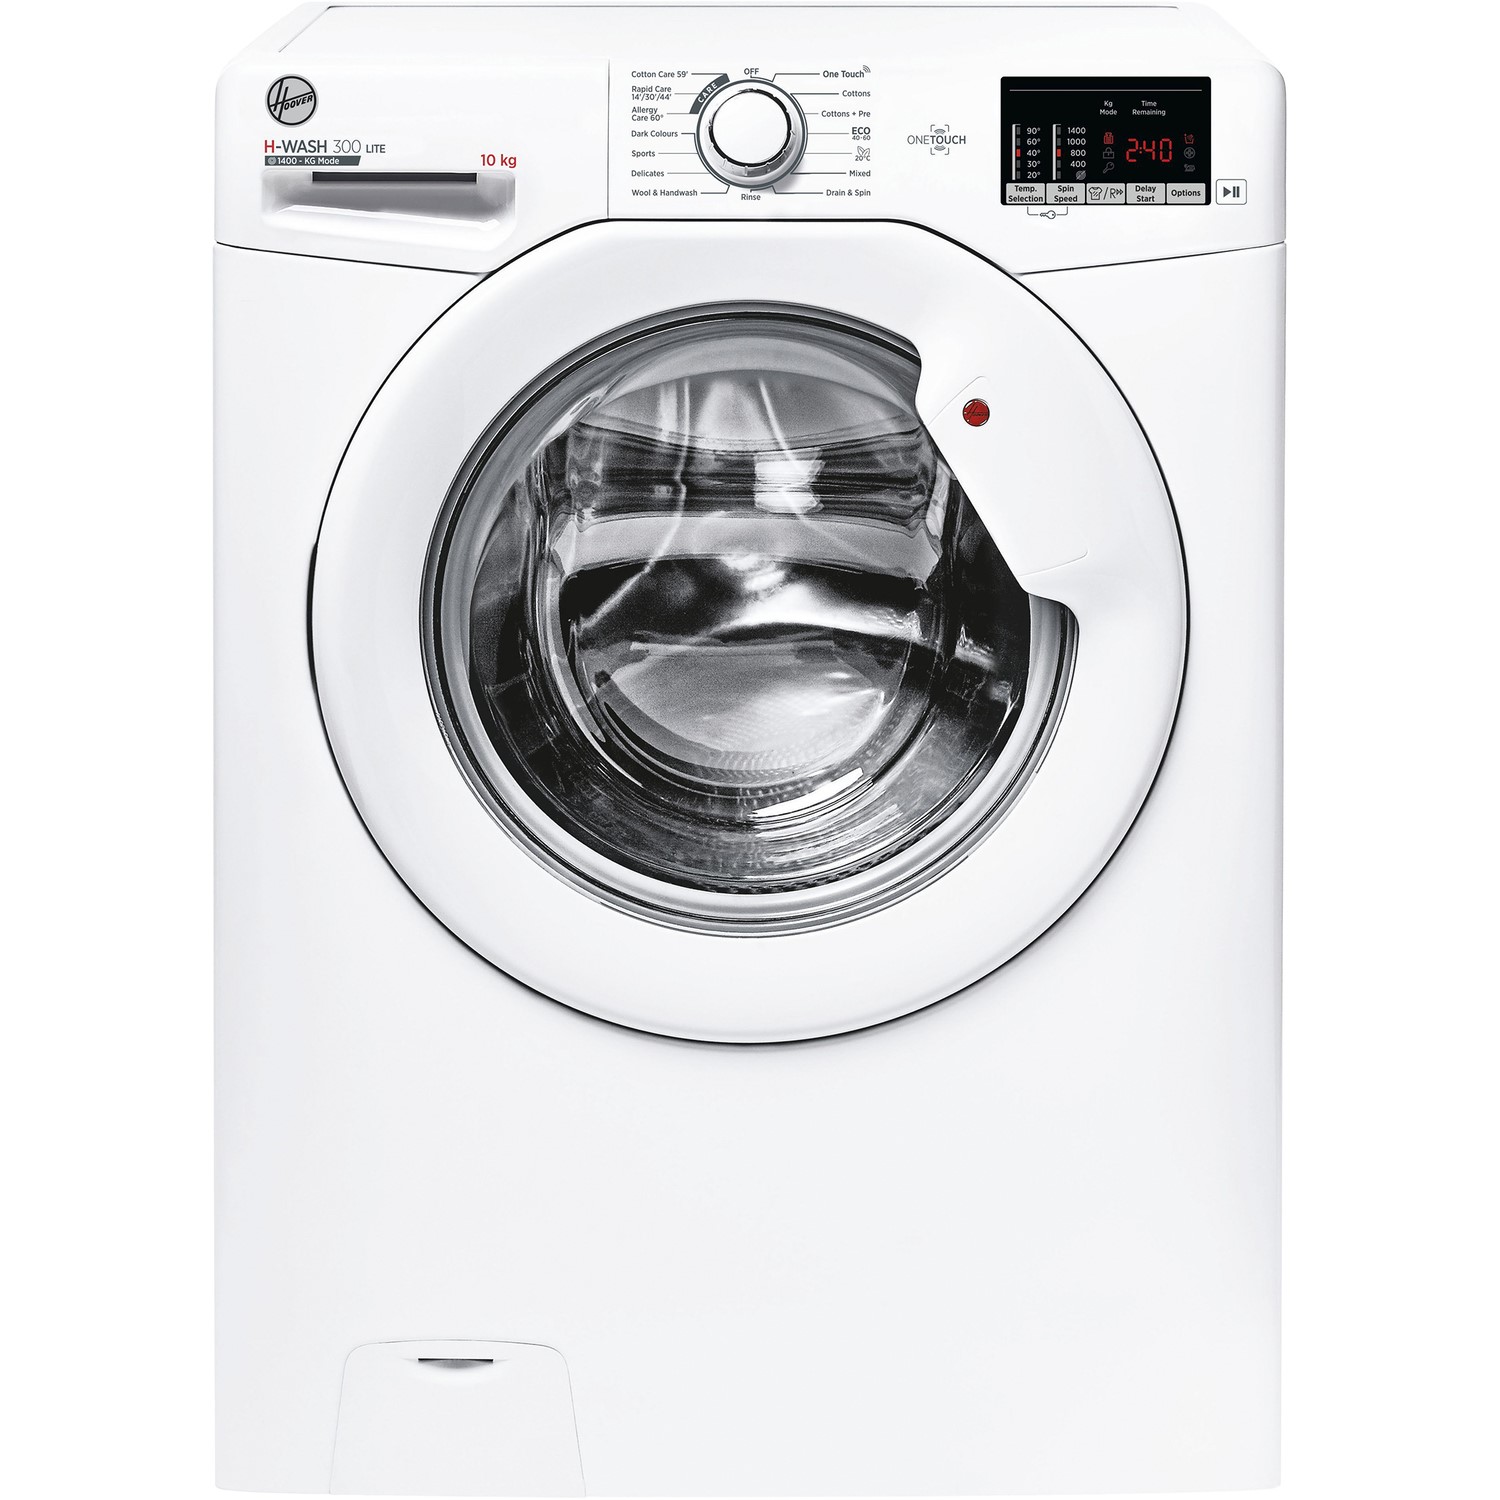 Photos - Other for Computer Hoover H-Wash 300 10kg 1400rpm Washing Machine - White 31019216 